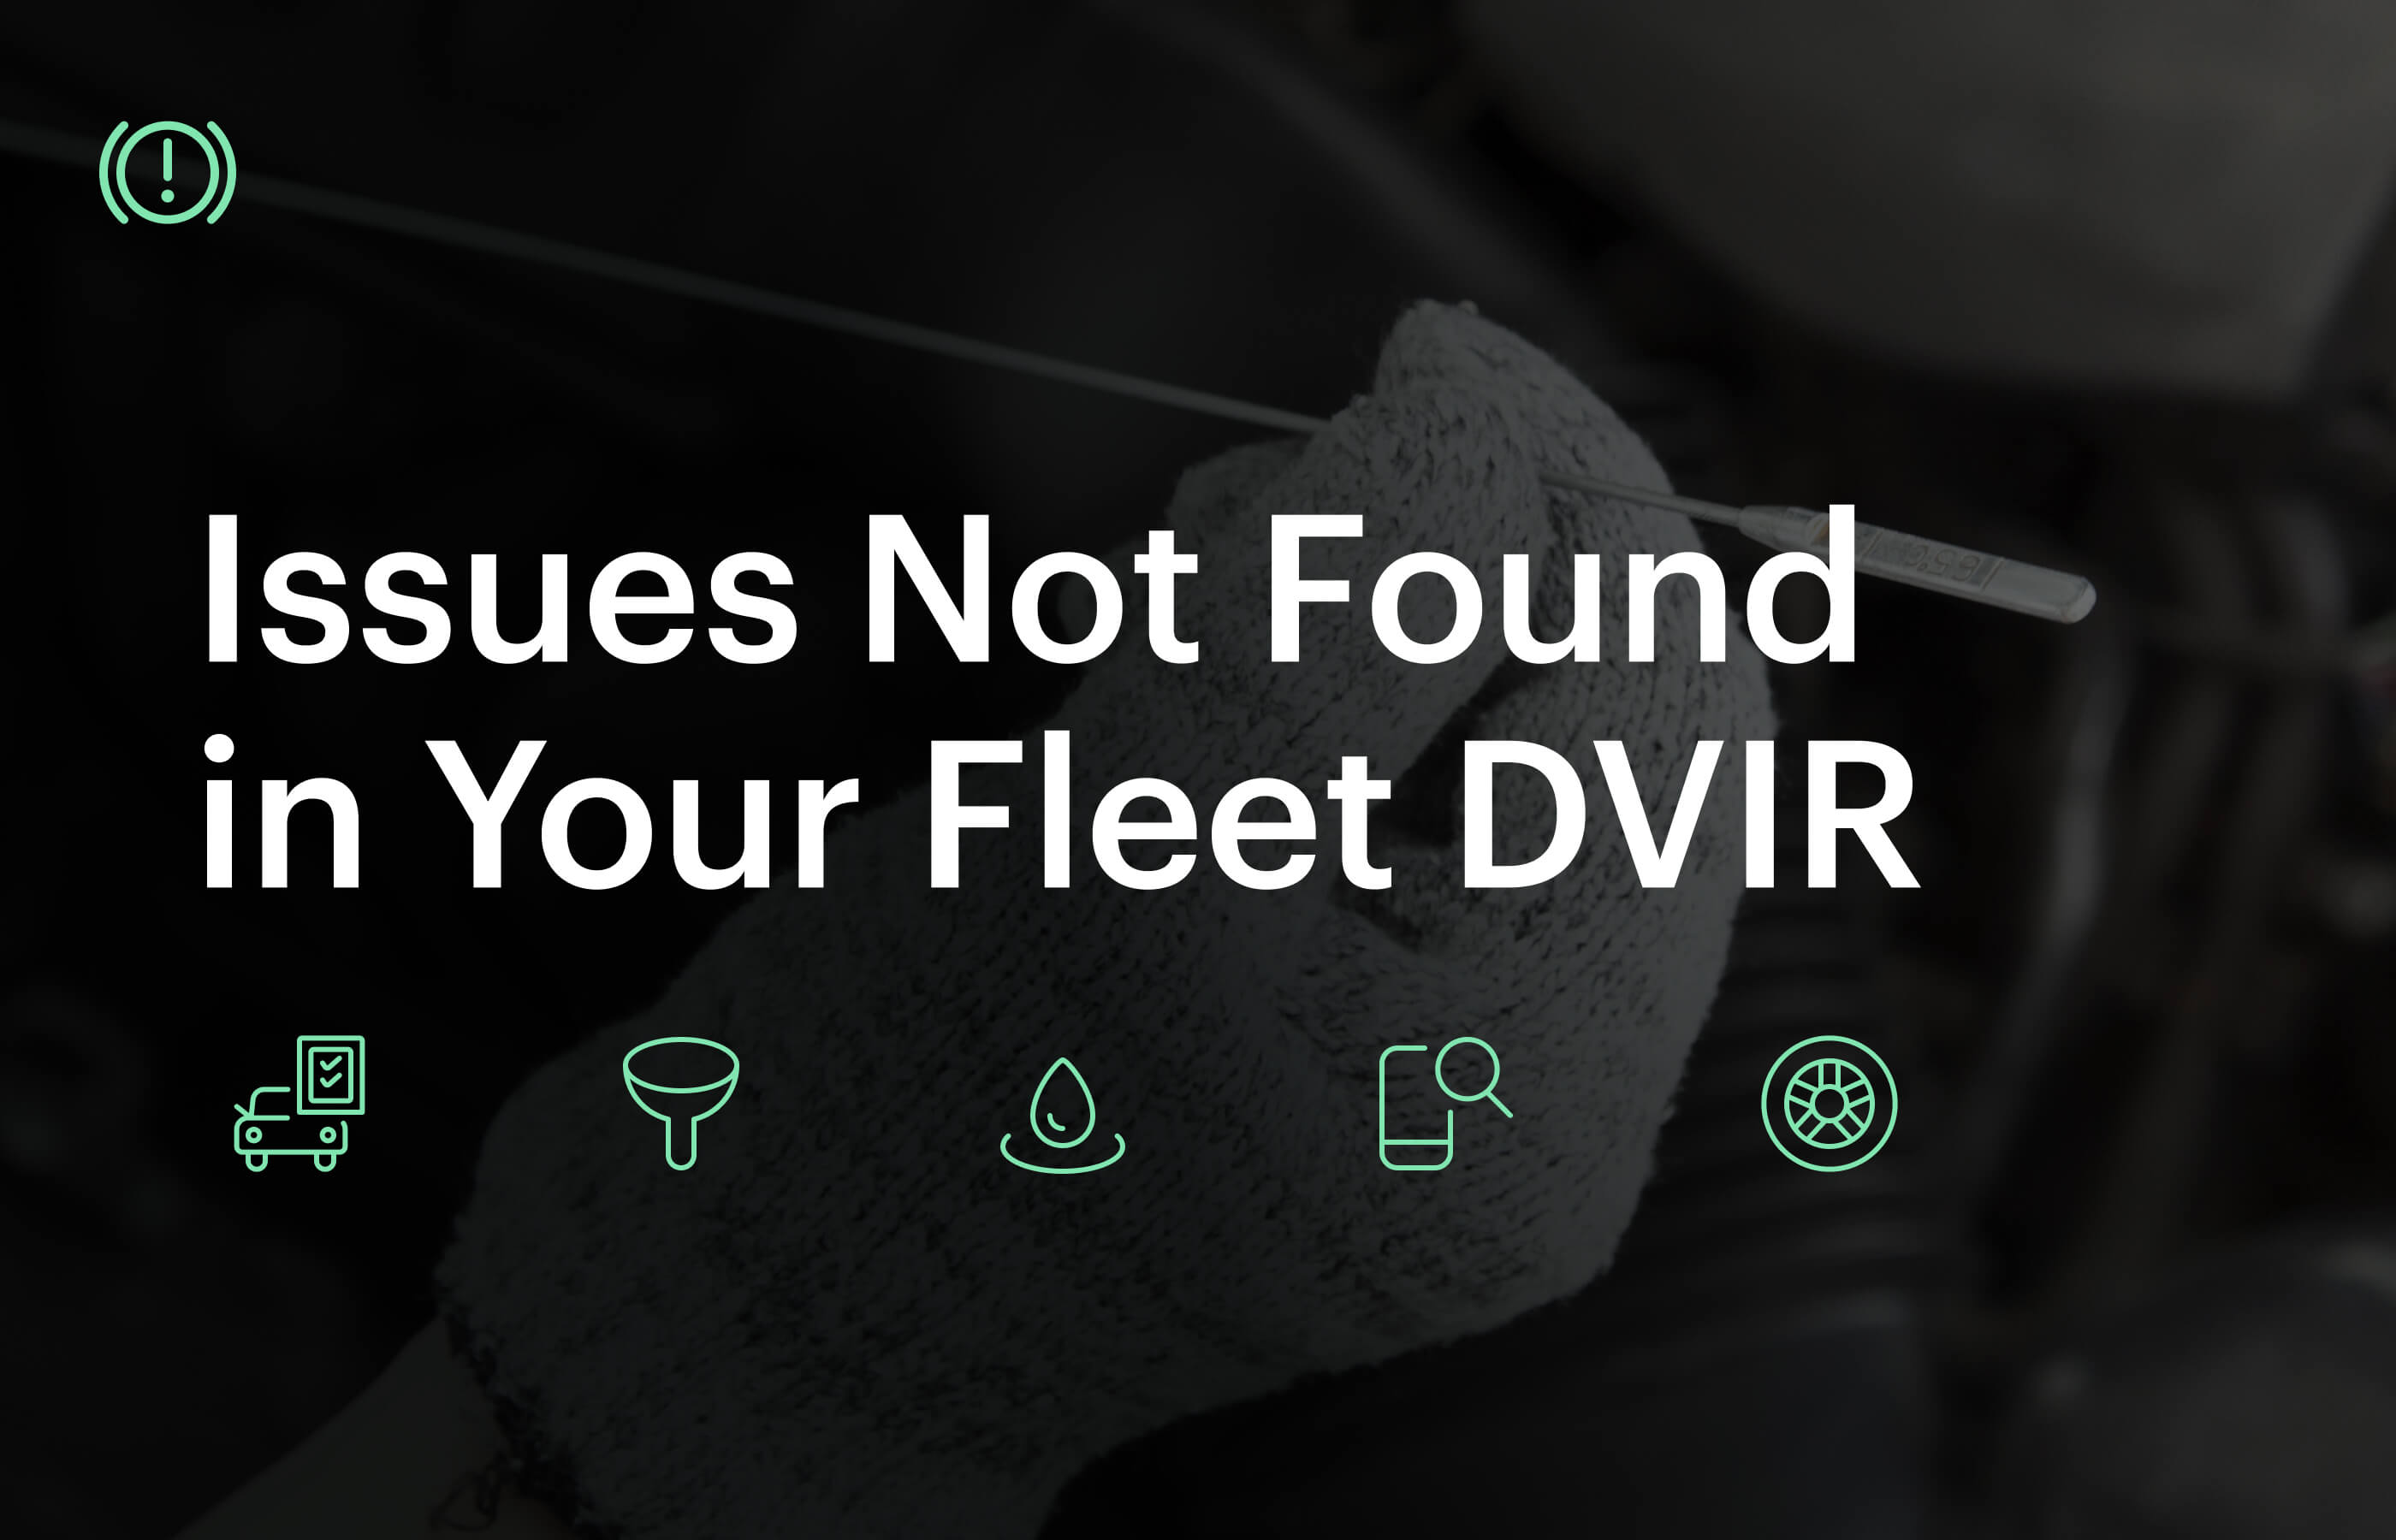 Issues not found on dvir